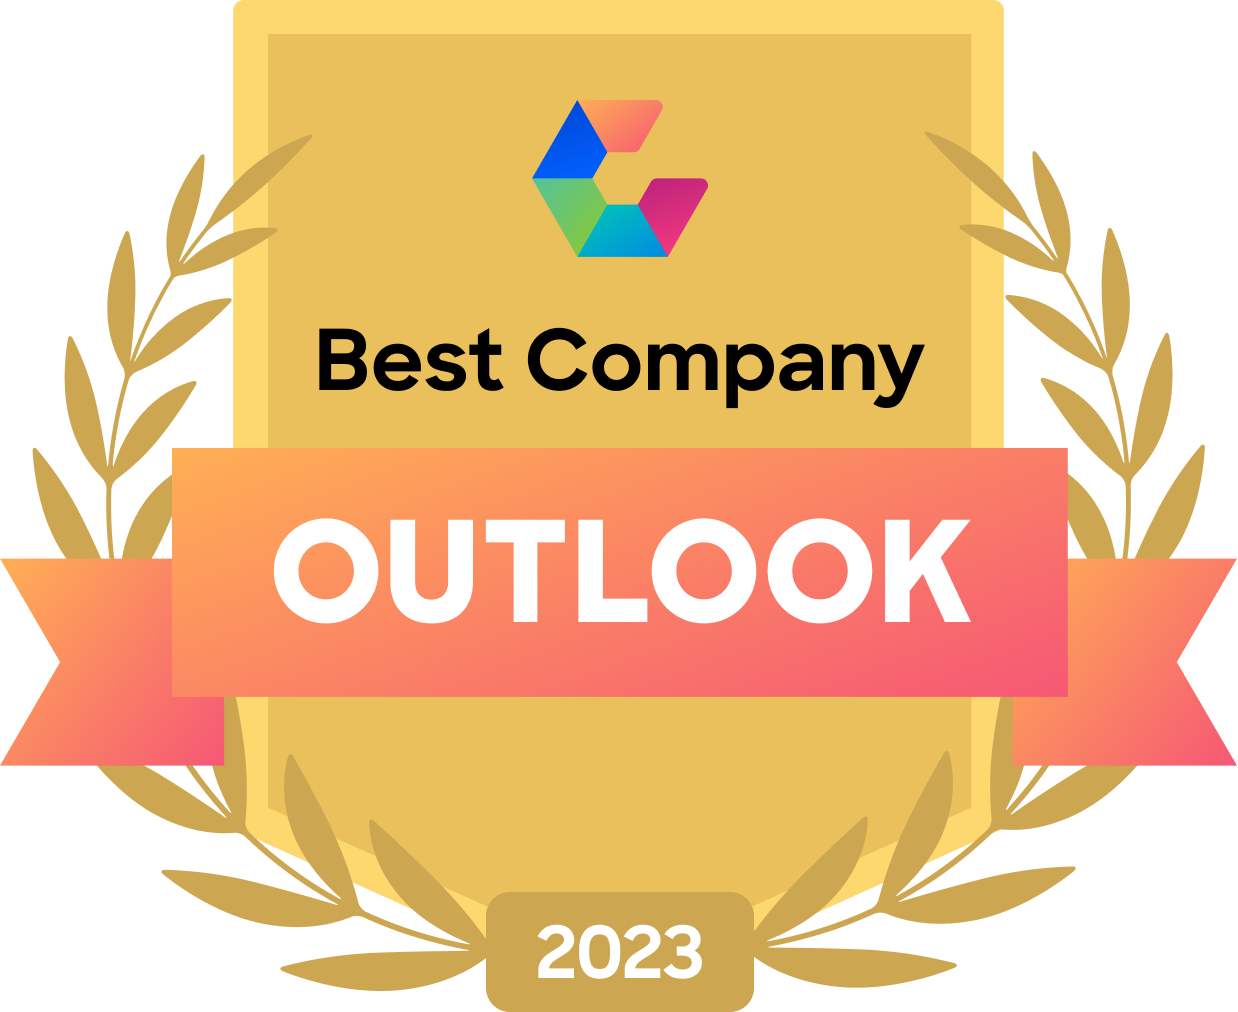 Top Rated Outlook of 2023